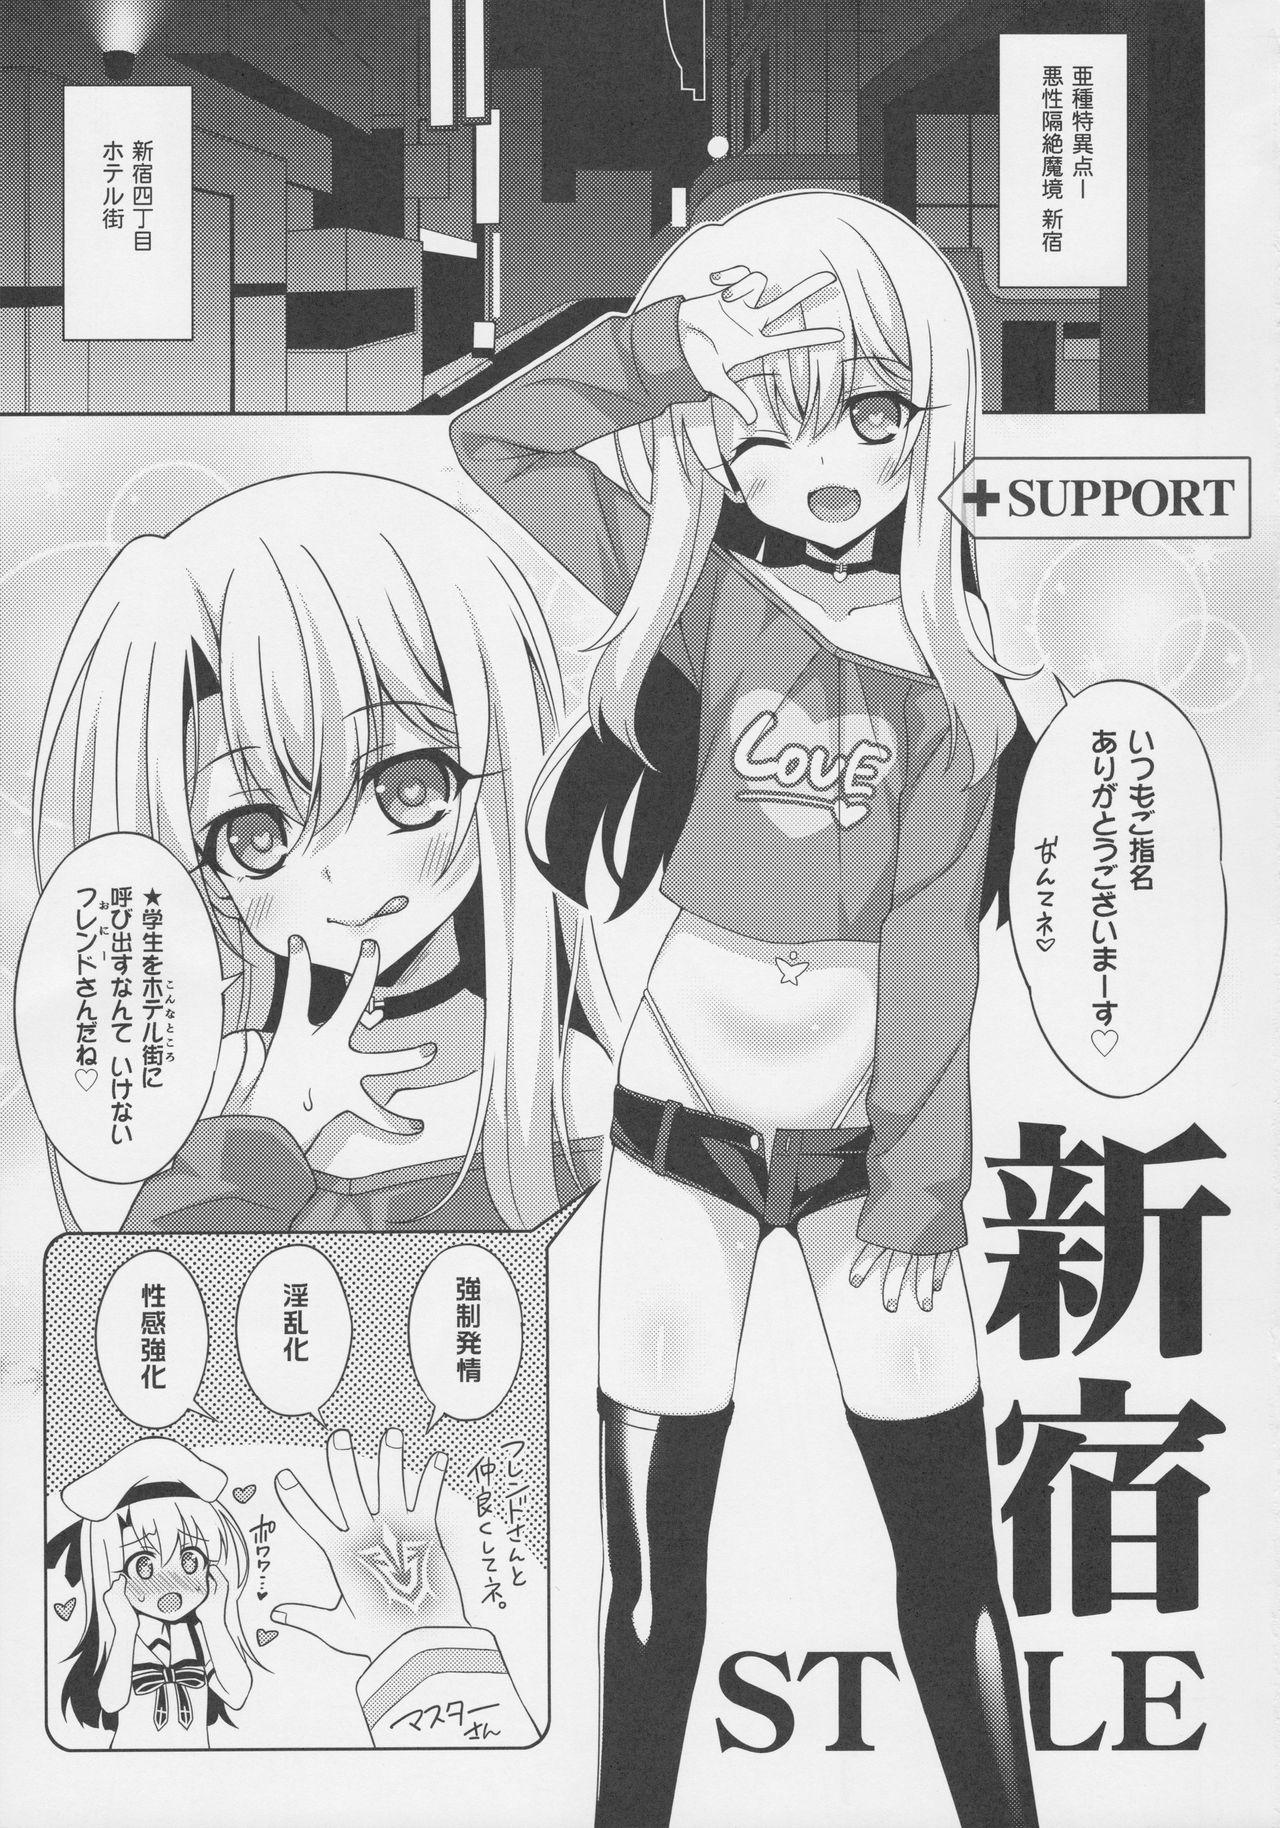 Smooth Illya-chan no Dosukebe Suppox - Fate grand order Gay Blondhair - Page 4